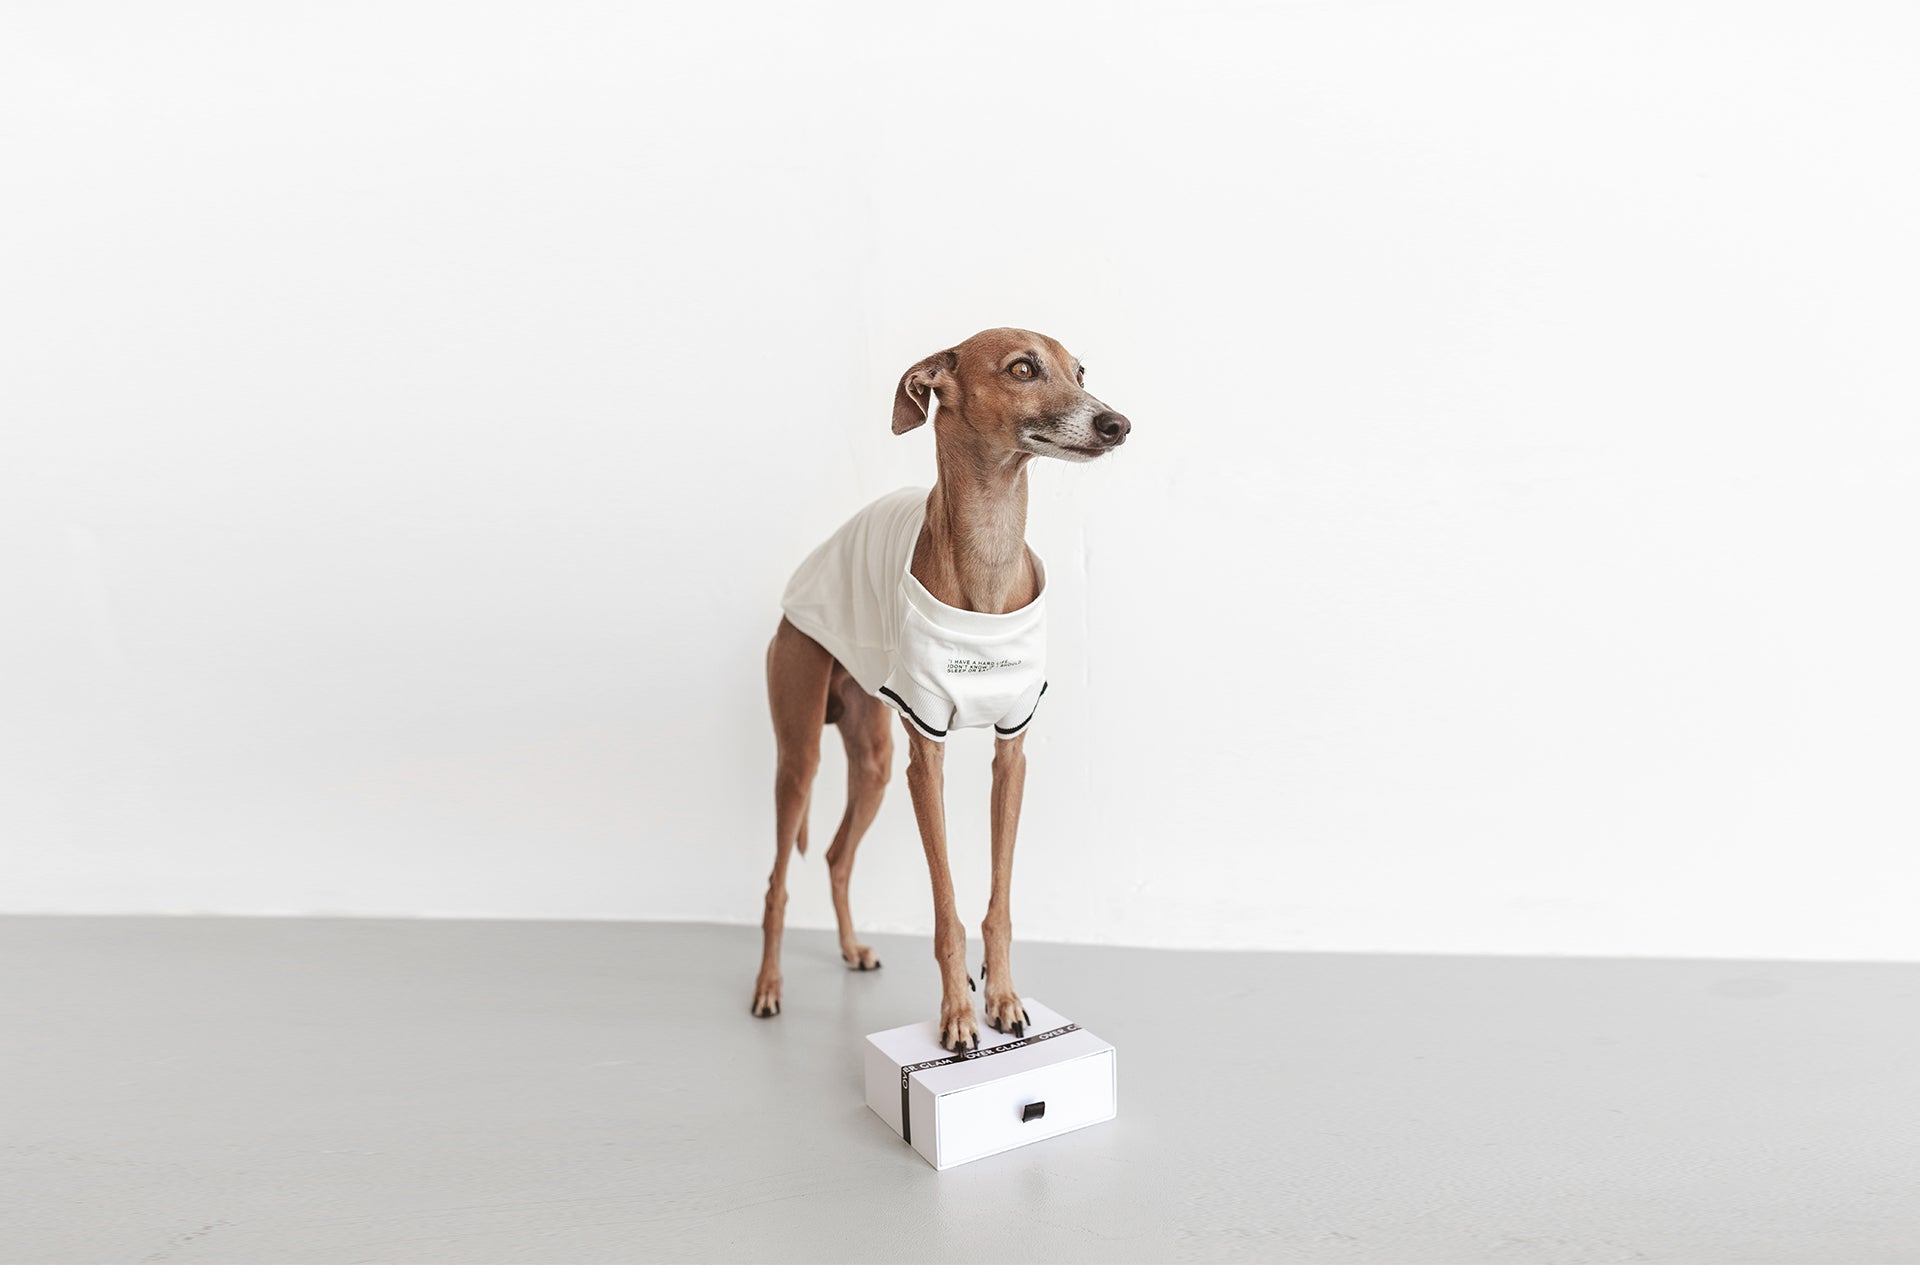 A dog wearing an Over Glam T-shirt on a box